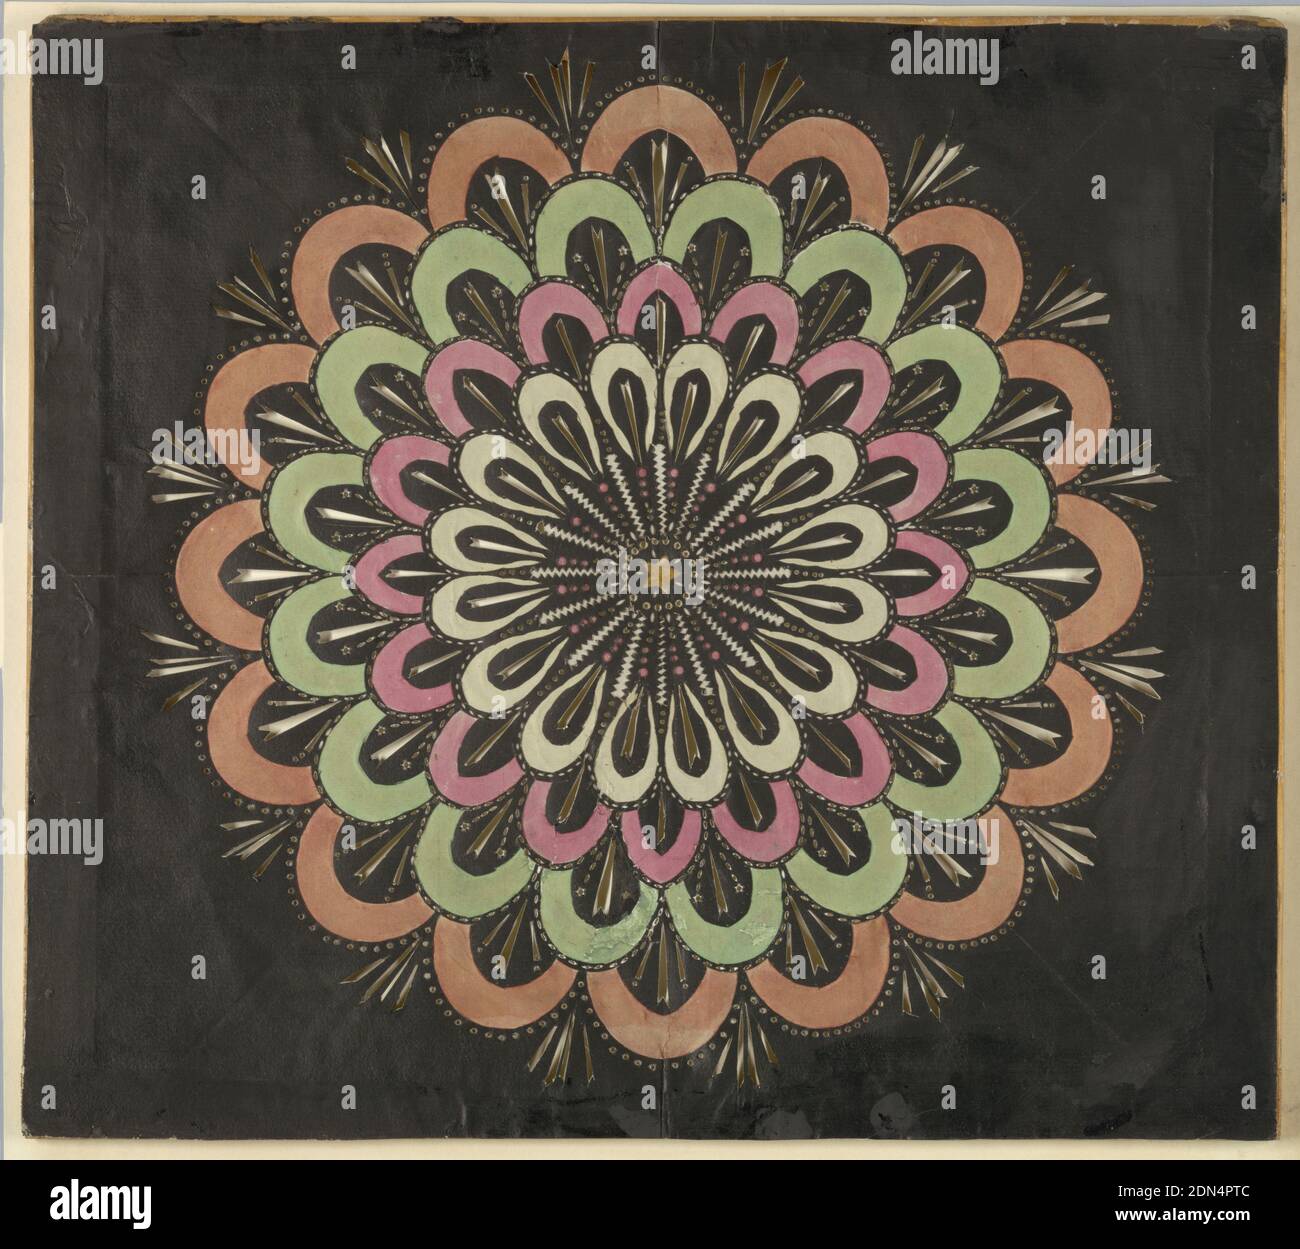 Radiating Raindrop Pattern, Cut paper on wood frame, Magic lantern slide, optical toy. On black field, pierced rays, with four concentric circles composed of deep scallops that from center outward are white, pink, green, and orange. Yellow star at center., Savoy, France, ca. 1780, toys & games, Lantern slide, Lantern slide Stock Photo